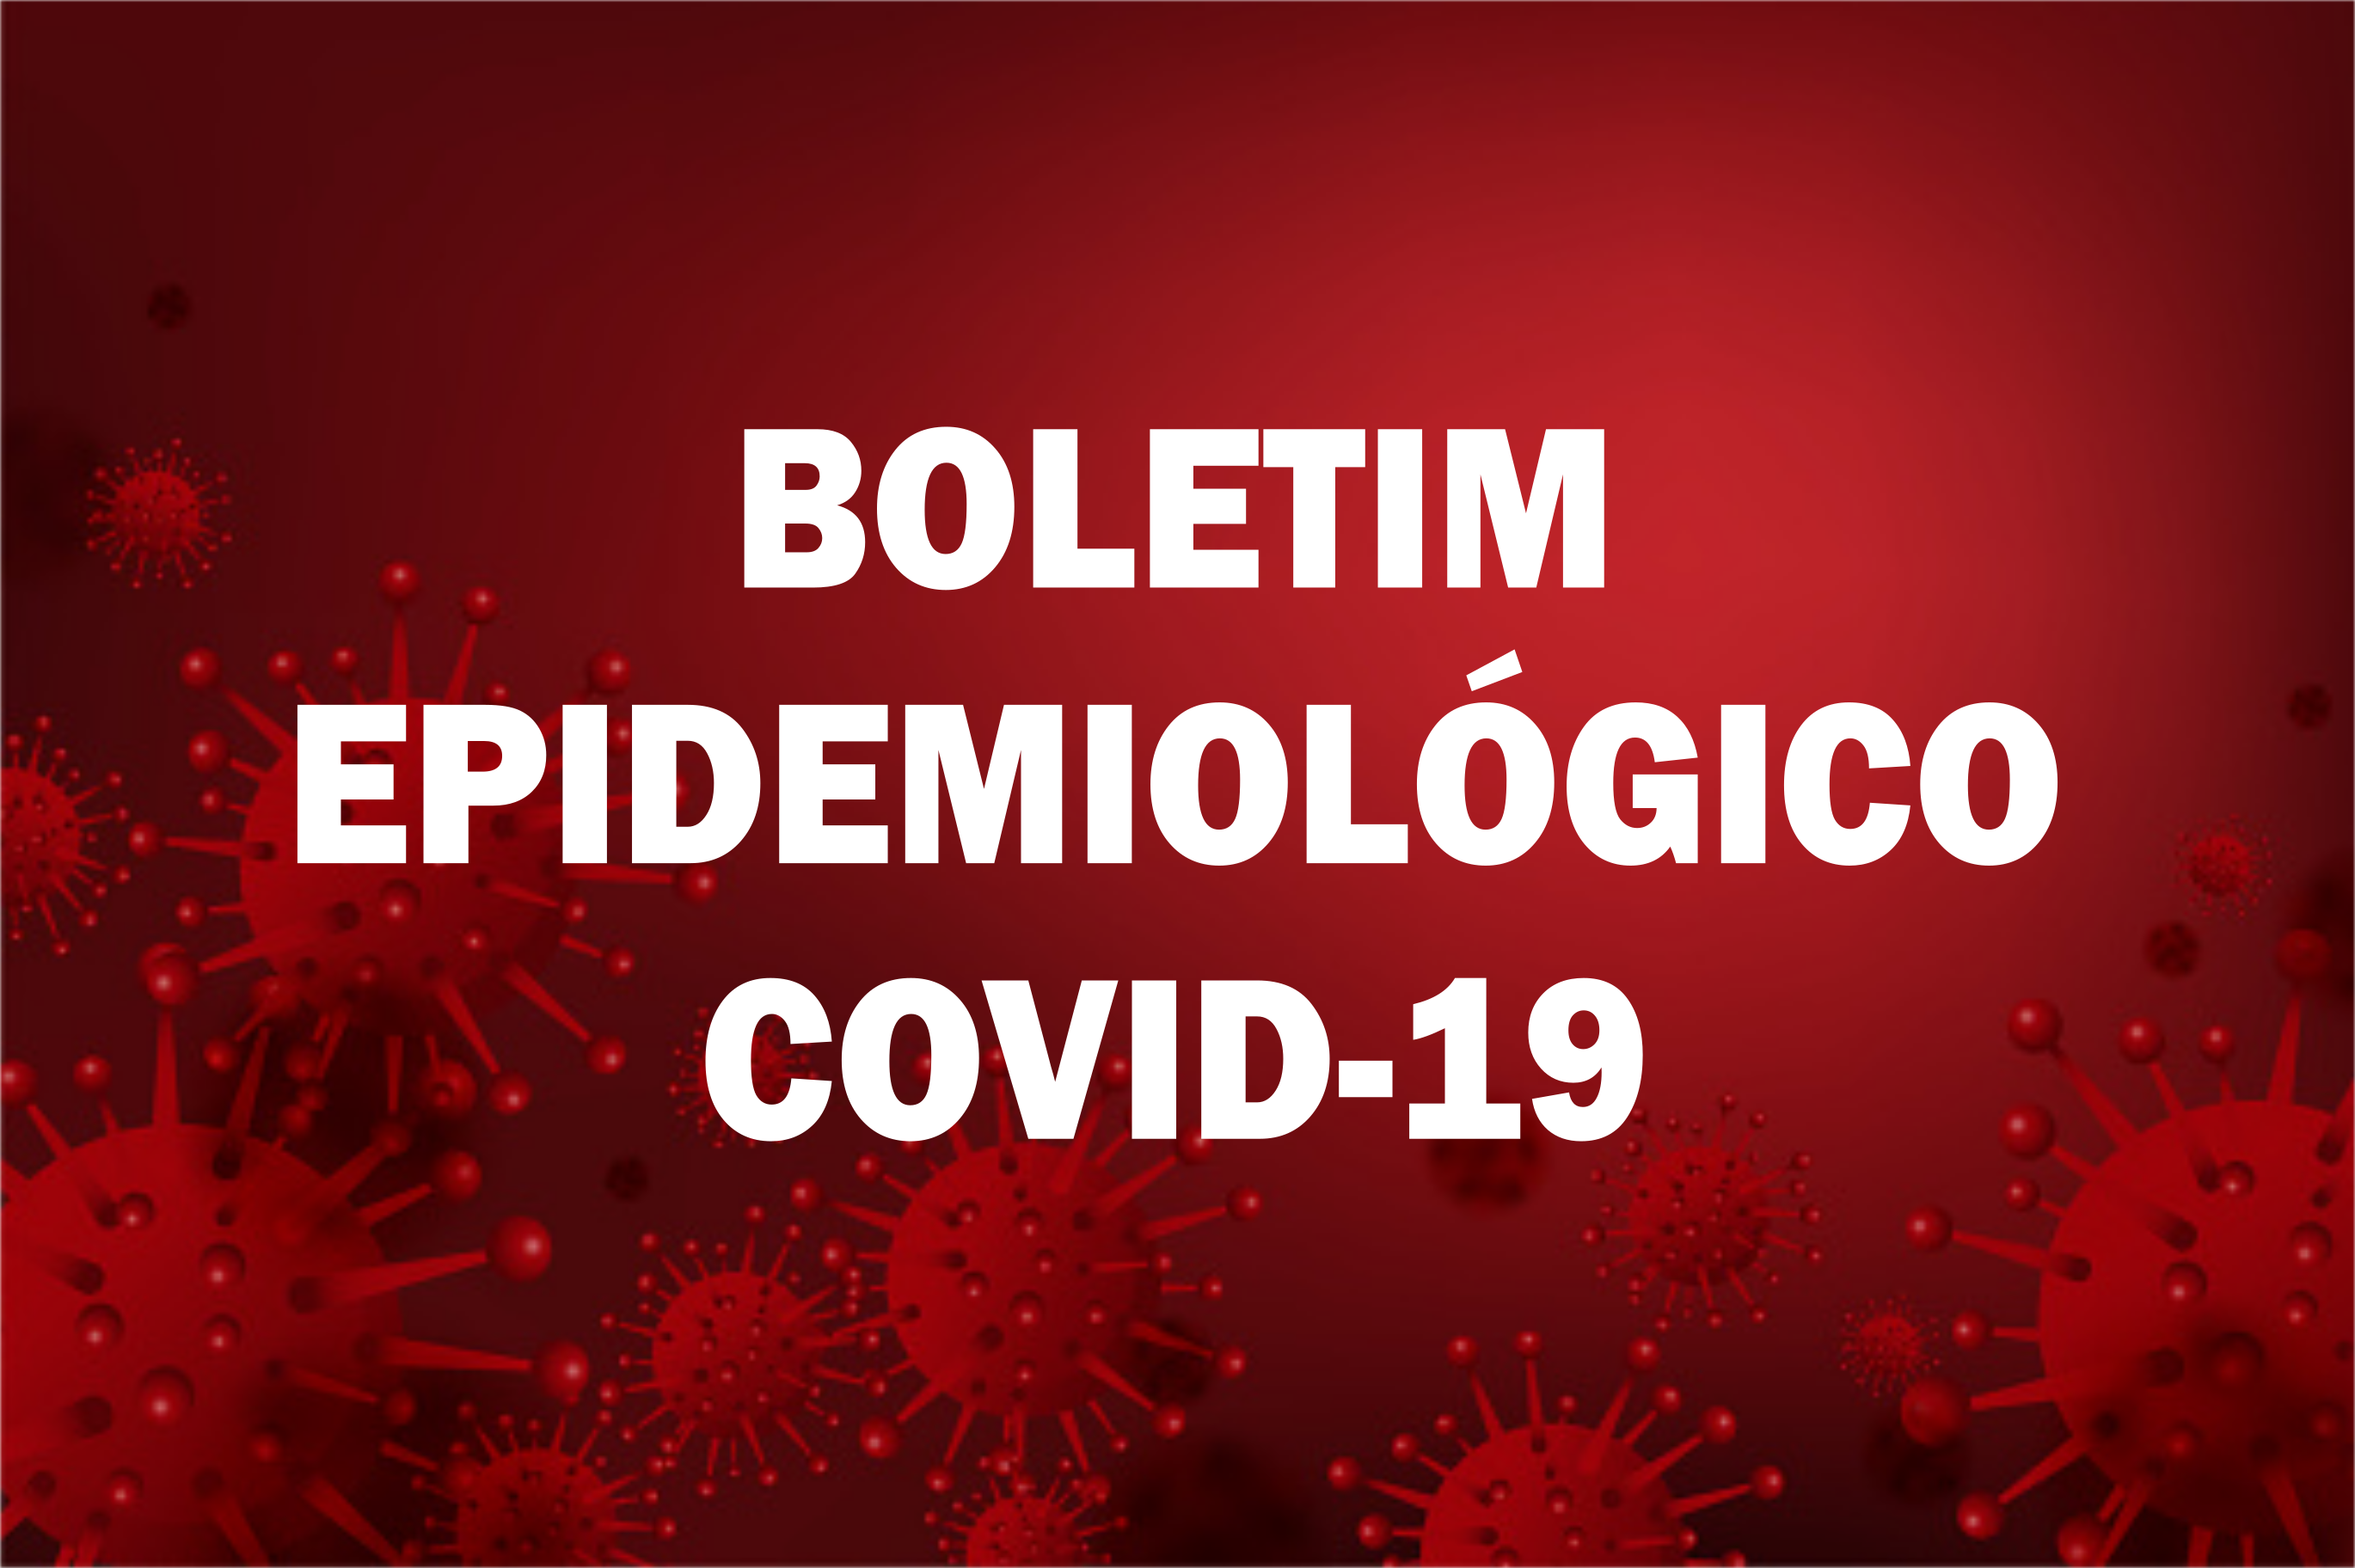 You are currently viewing BOLETIM EPIDEMIOLÓGICO Nº 126 (COVID-19)